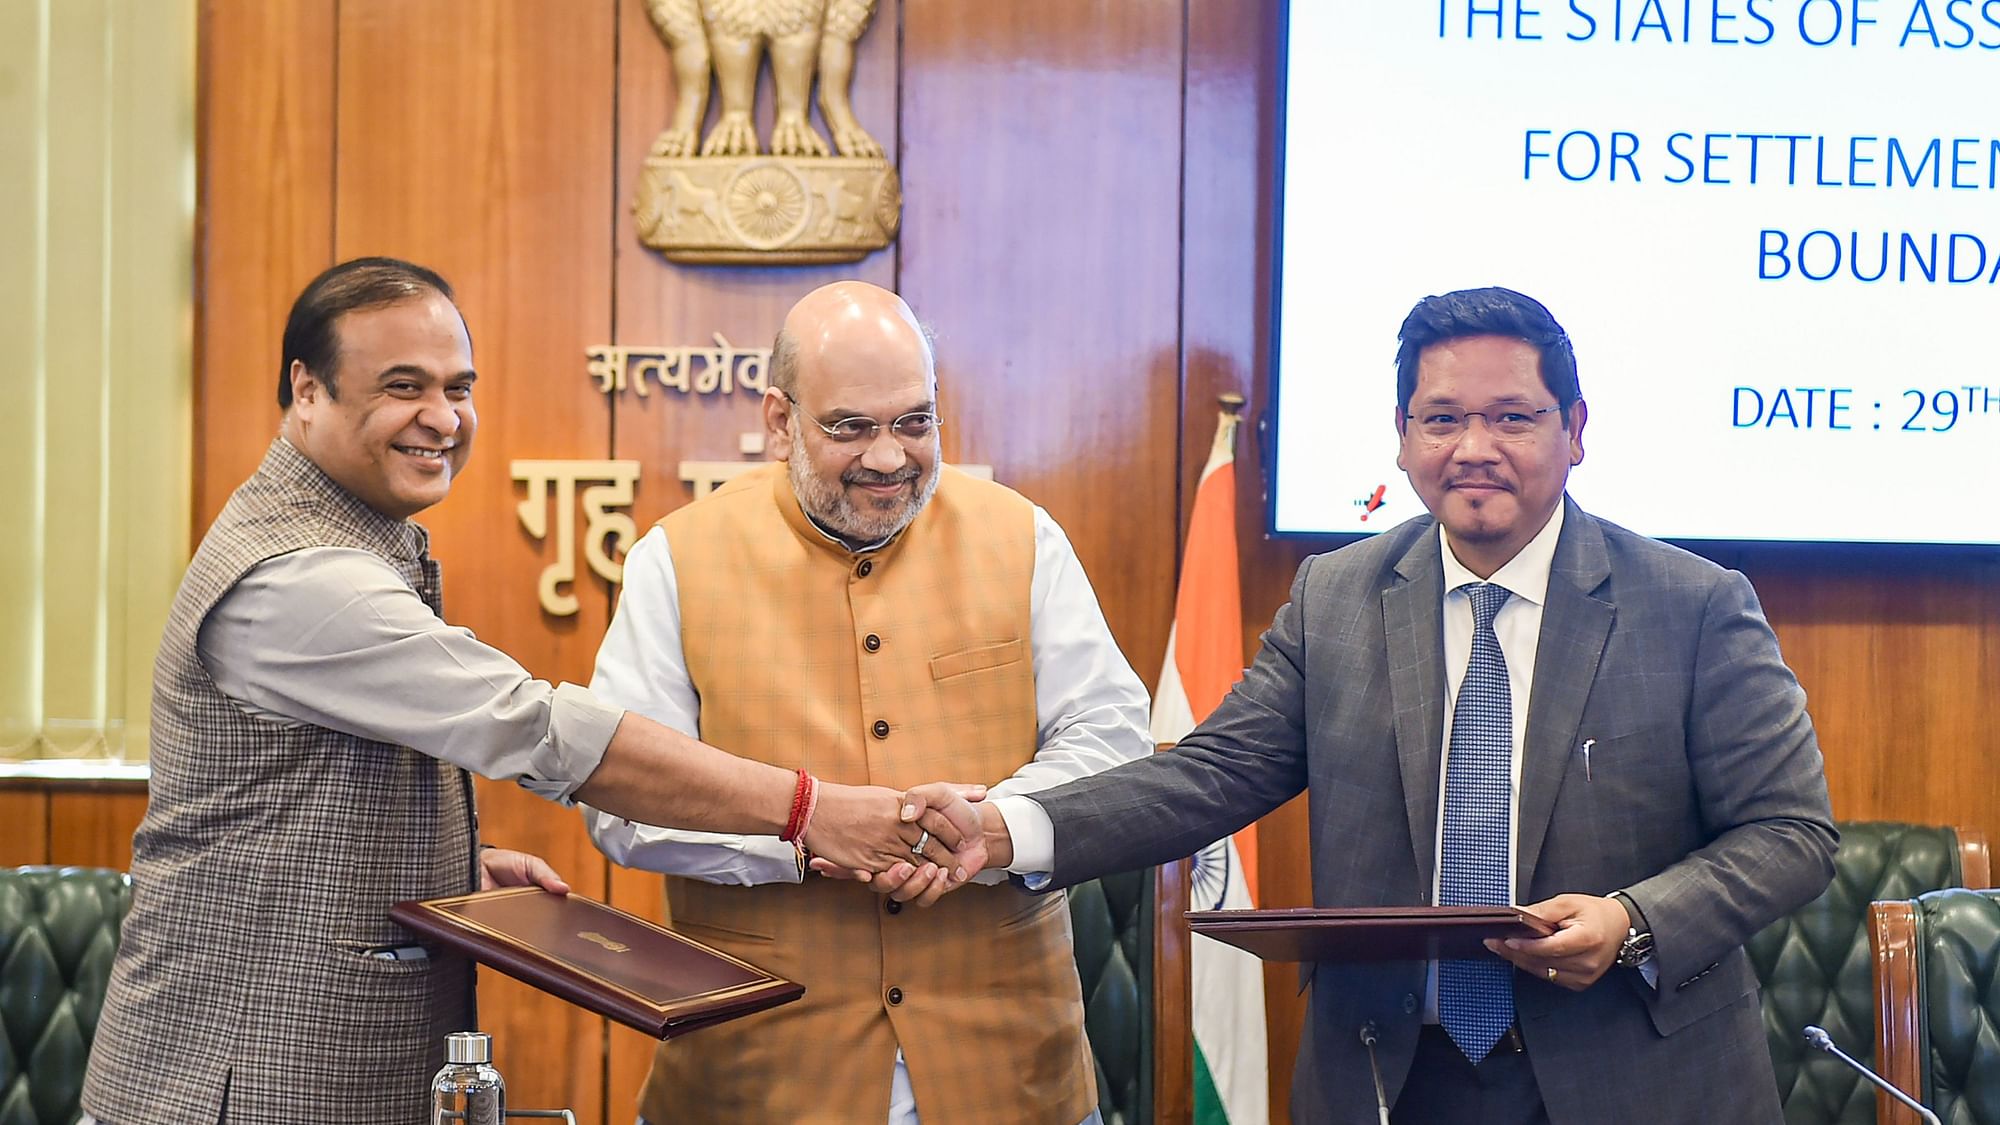 <div class="paragraphs"><p>Assam Chief Minister Himanta Biswa Sarma and Meghalaya CM Conrad Sangma signed an agreement on Tuesday, 29 March, to resolve the 50-year-old pending <a href="https://www.thequint.com/news/politics/assam-cm-himanta-biswa-sarma-holds-all-party-meeting-resolve-border-row-with-meghalaya#read-more">inter-state border</a> dispute between the two states.</p></div>